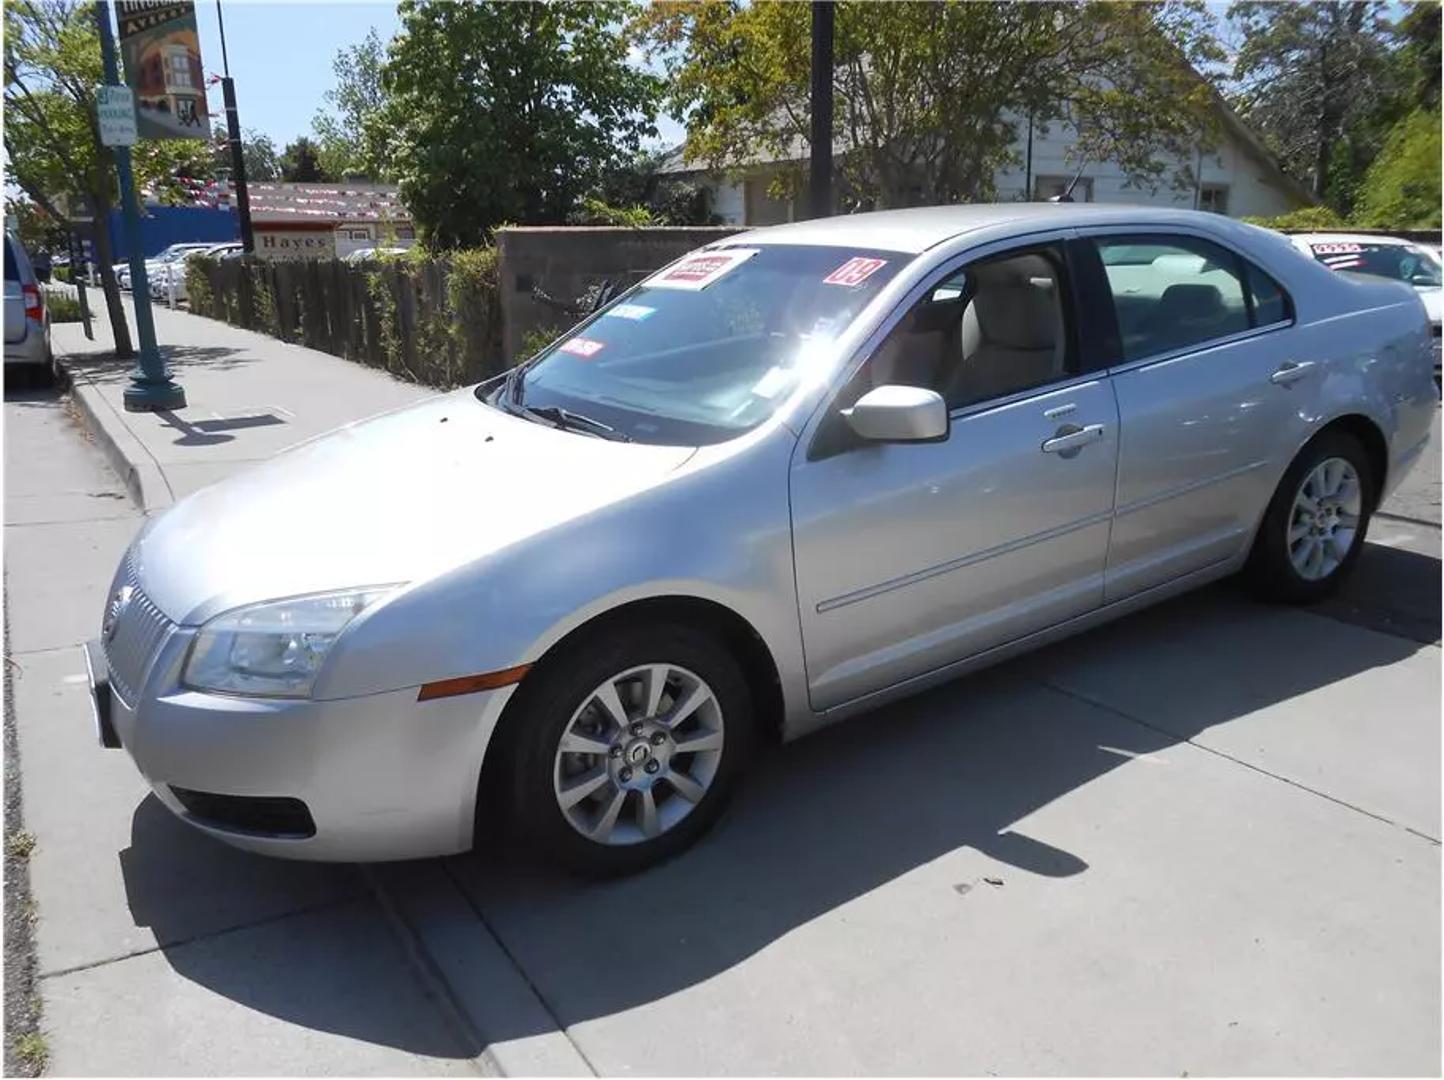 Used 2009 Mercury Milan  with VIN 3MEHM07Z89R632297 for sale in Roseville, CA